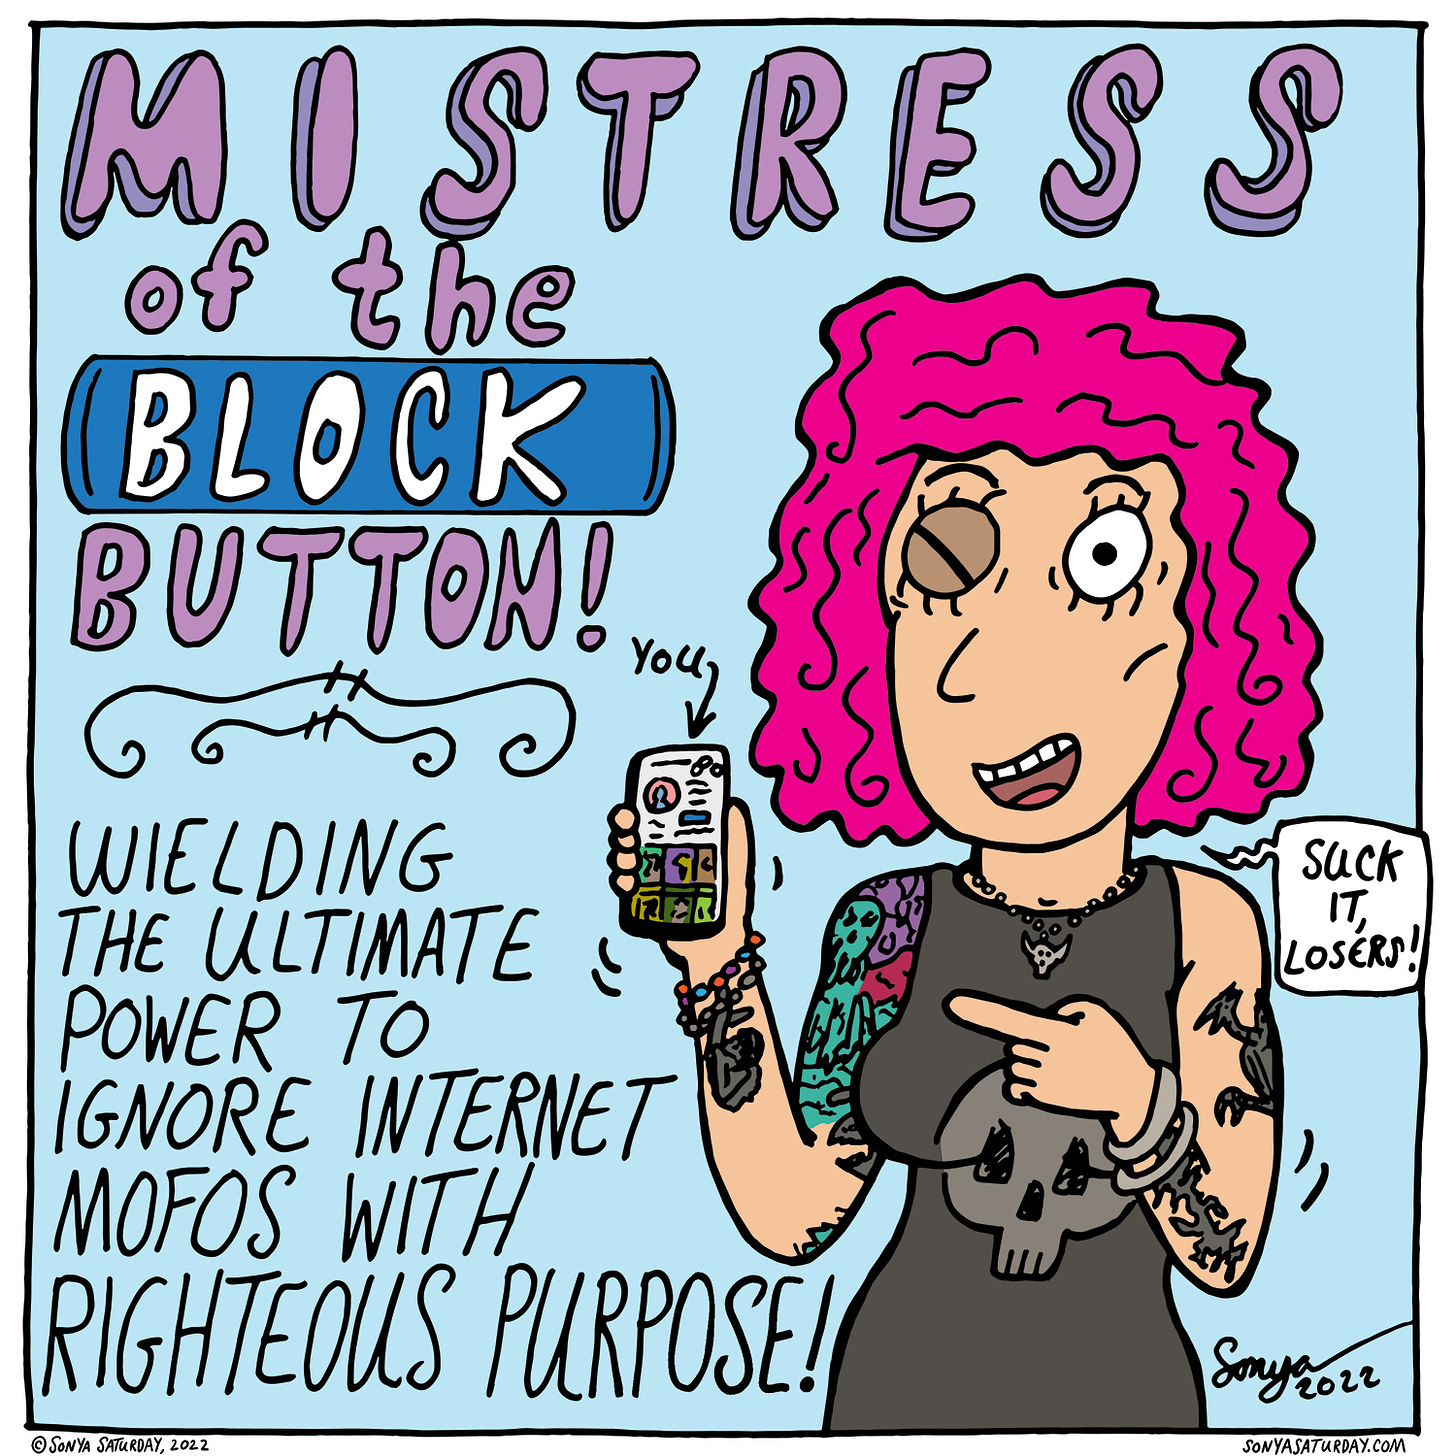 Comic strip of Sonya Saturday using the "block" button on her phone and saying "Suck it, losers"